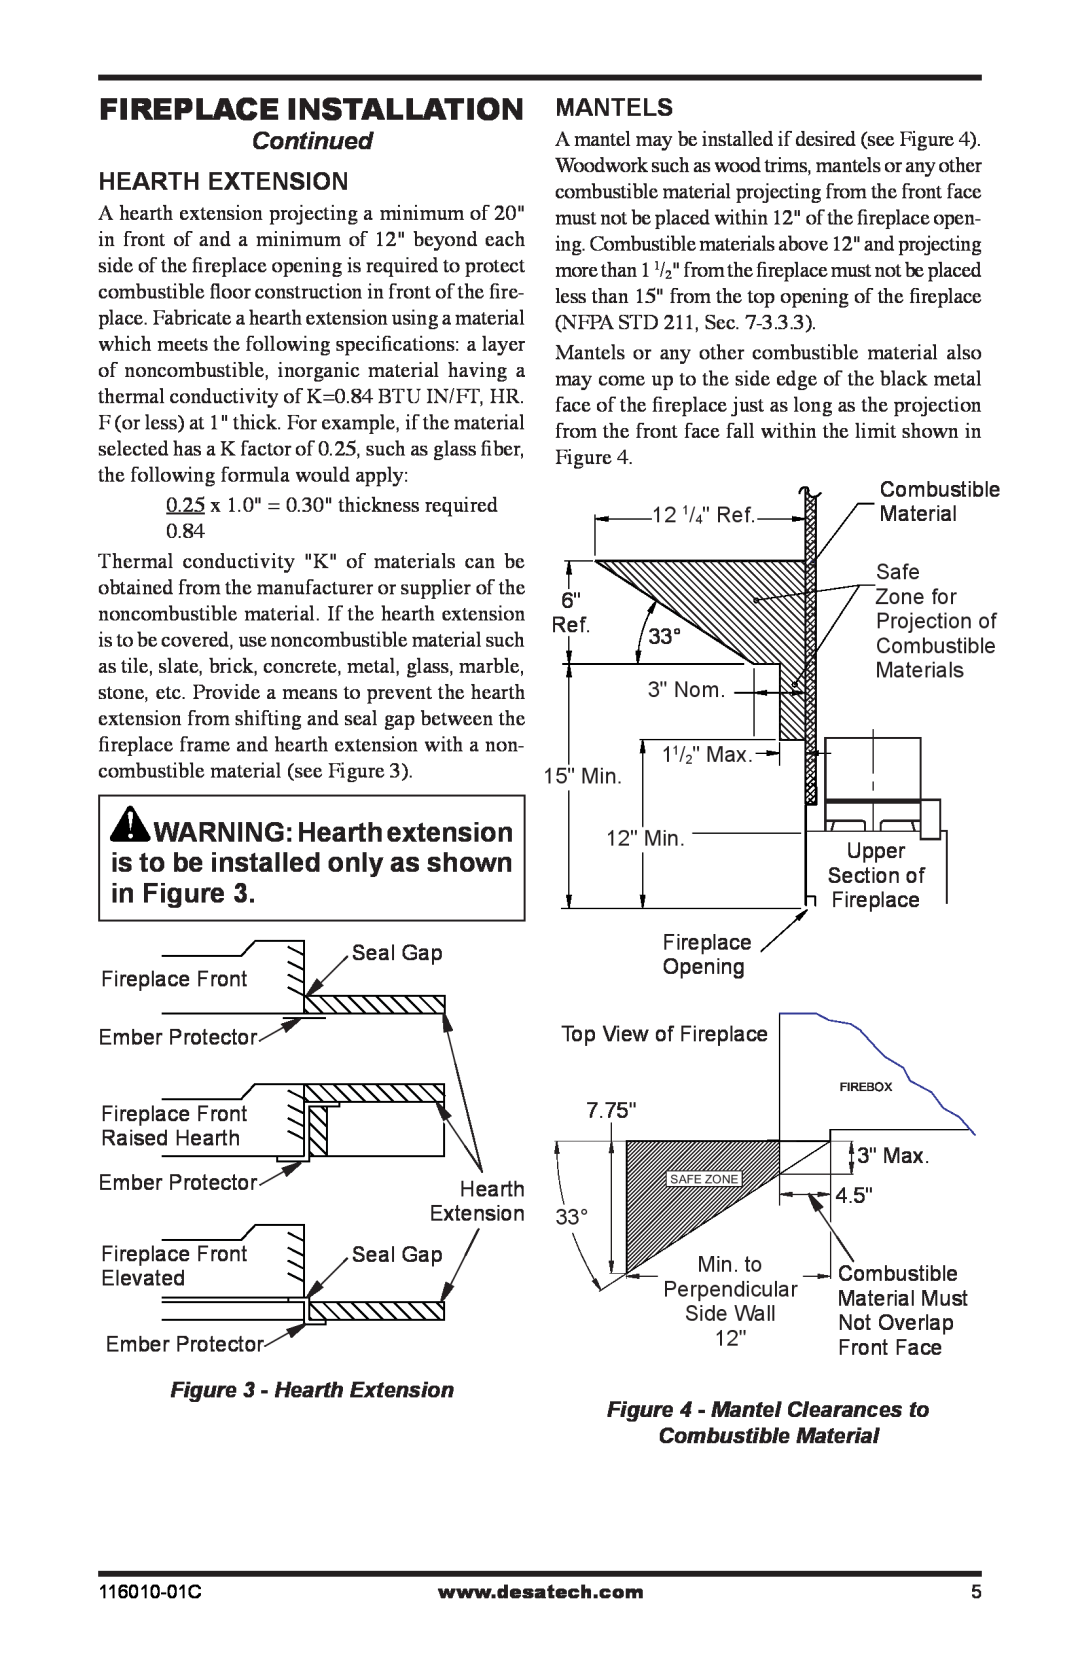 Desa (V)G36H Fireplace Installation, WARNING Hearth extension, is to be installed only as shown in Figure, Continued 